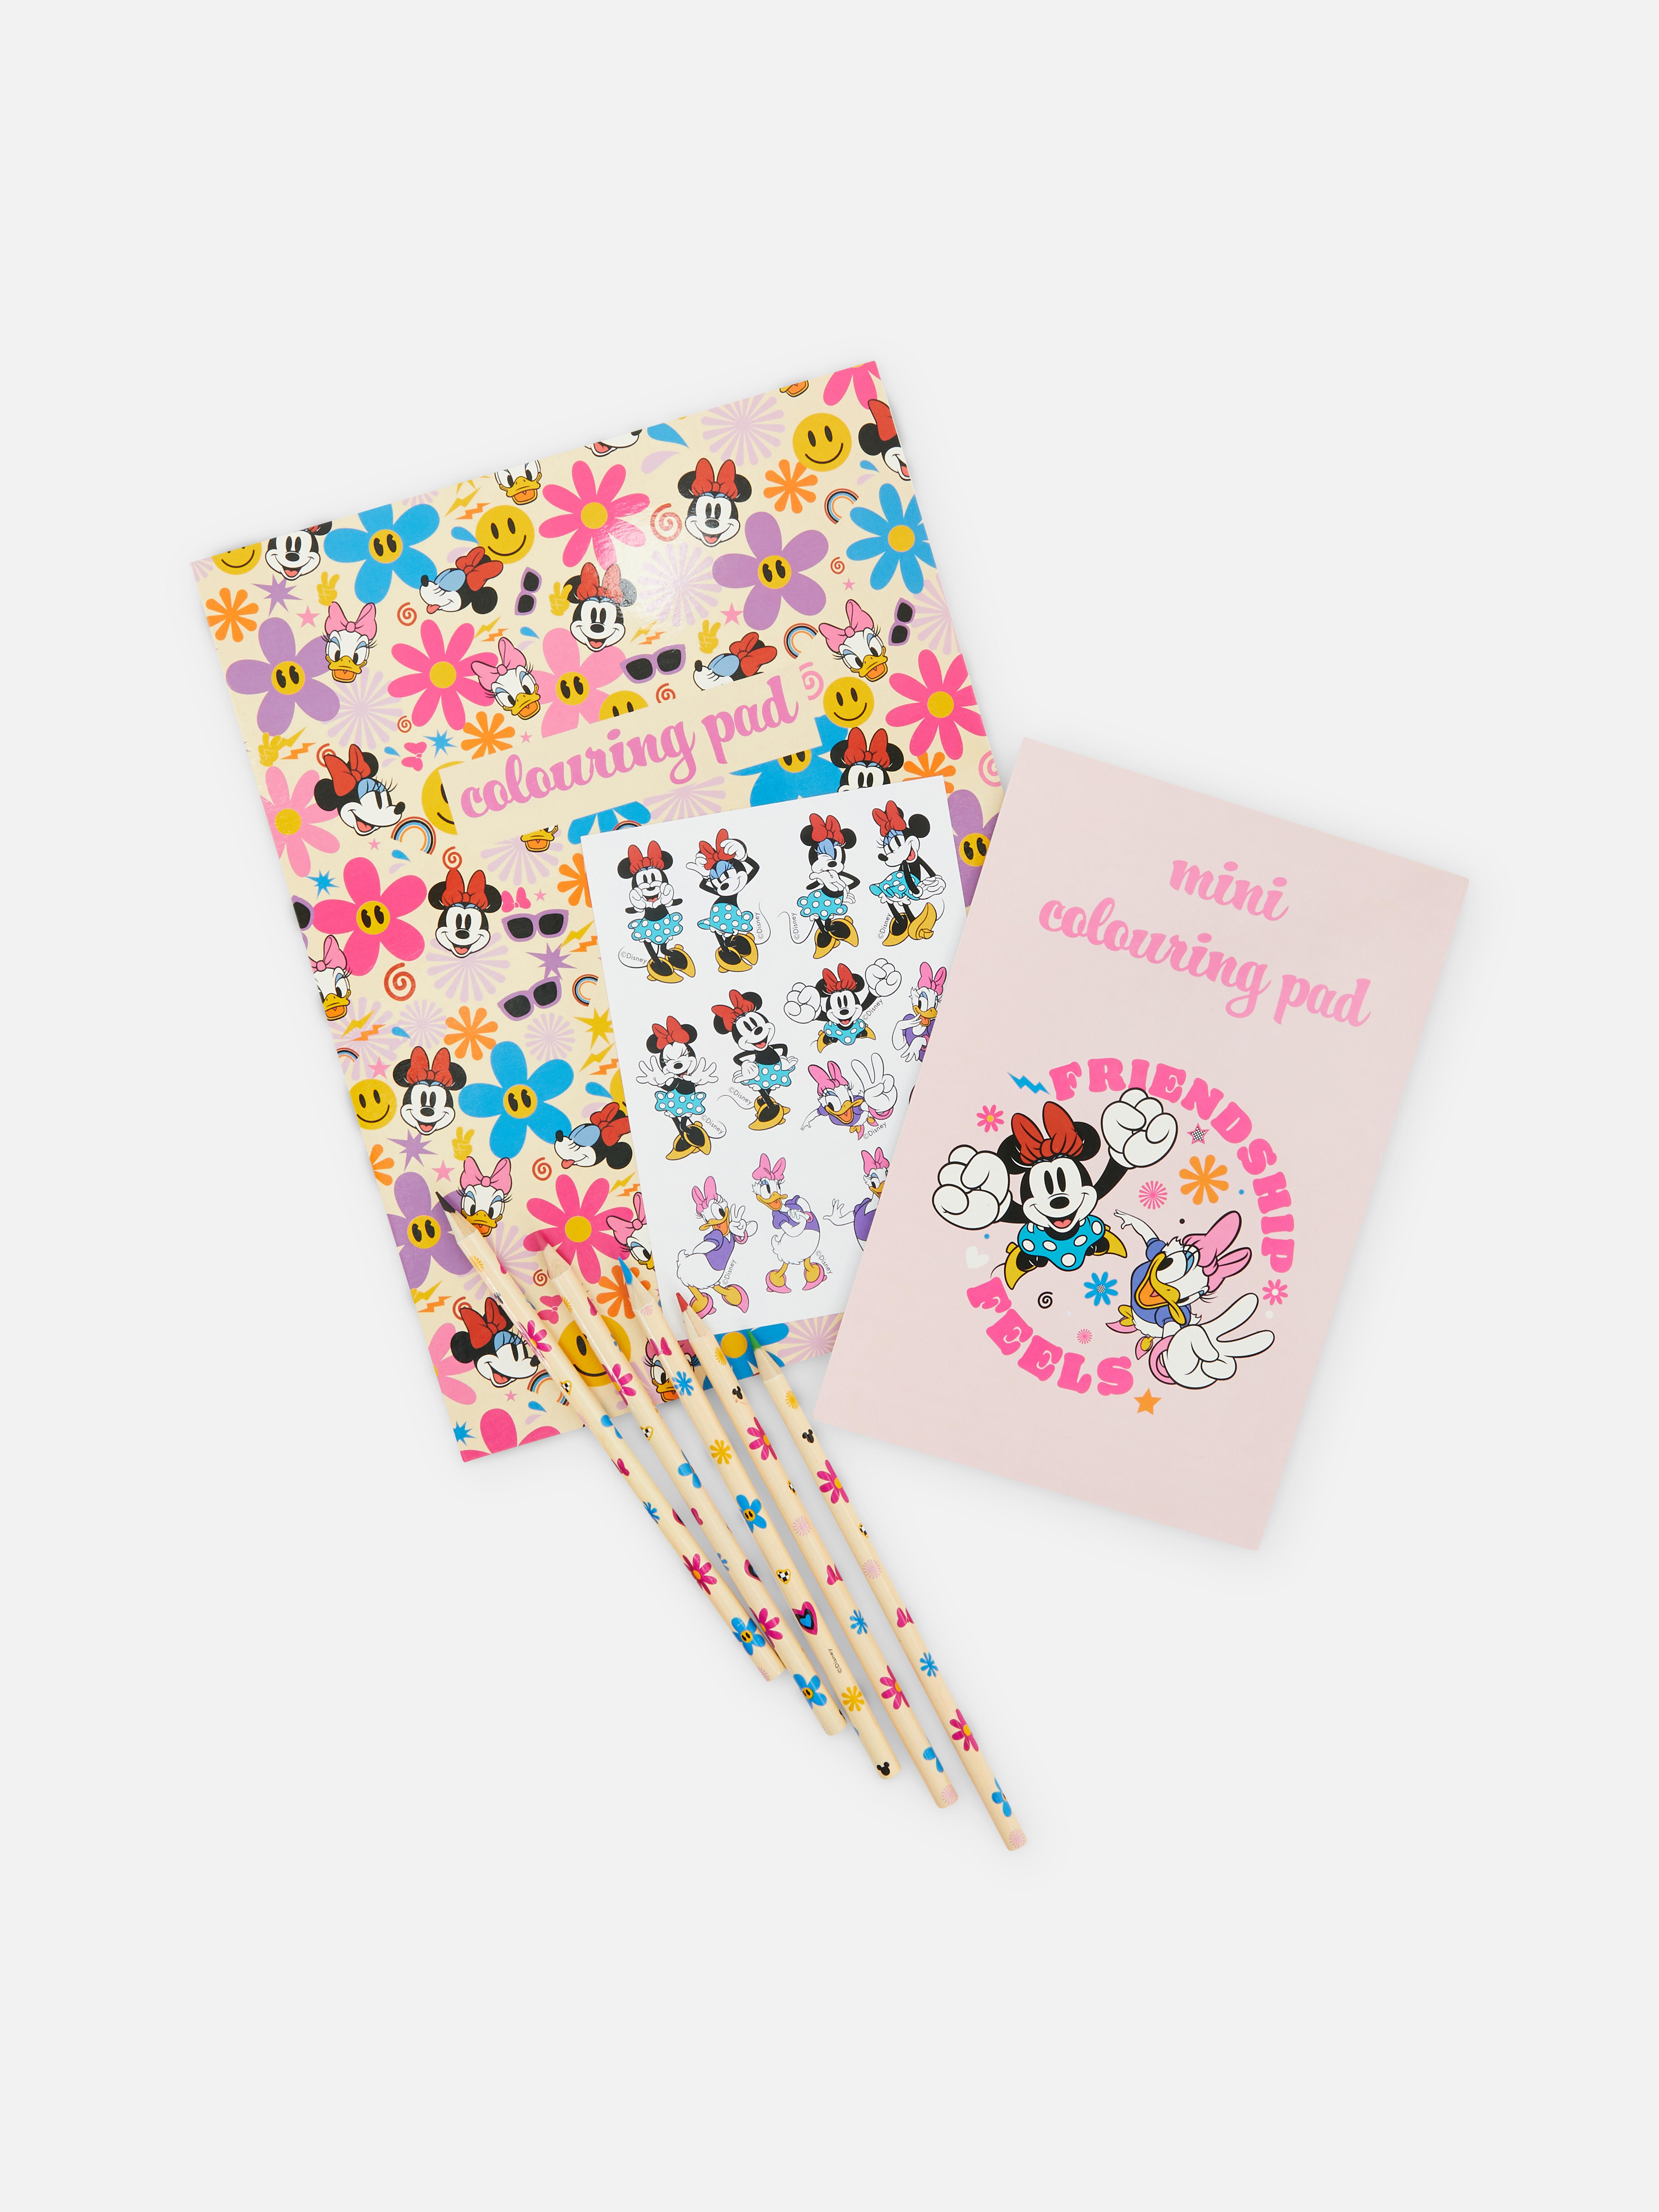 Disney's Minnie Mouse Mini Colouring Play Pack